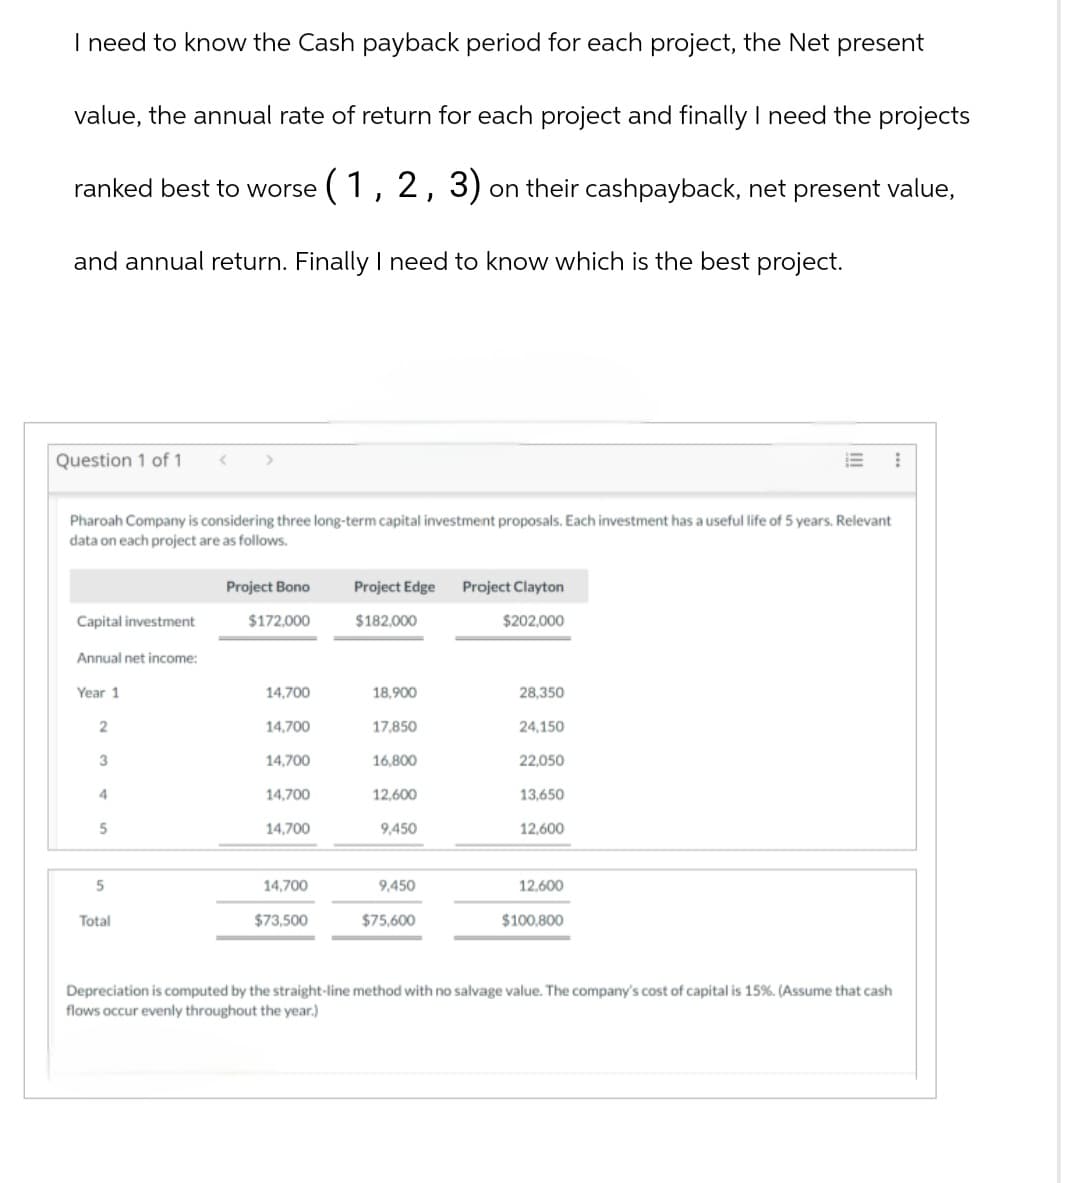 I need to know the Cash payback period for each project, the Net present
value, the annual rate of return for each project and finally I need the projects
ranked best to worse (1, 2, 3) on their cashpayback, net present value,
and annual return. Finally I need to know which is the best project.
Question 1 of 1
>
E
Pharoah Company is considering three long-term capital investment proposals. Each investment has a useful life of 5 years. Relevant
data on each project are as follows.
Project Bono
Project Edge Project Clayton
Capital investment
$172,000
$182,000
$202,000
Annual net income:
Year 1
14,700
18,900
28,350
2
14,700
17,850
24,150
3
14,700
16,800
22,050
4
14,700
12.600
13,650
5
14,700
9,450
12,600
5
14,700
9,450
12,600
Total
$73,500
$75,600
$100,800
Depreciation is computed by the straight-line method with no salvage value. The company's cost of capital is 15%. (Assume that cash
flows occur evenly throughout the year.)